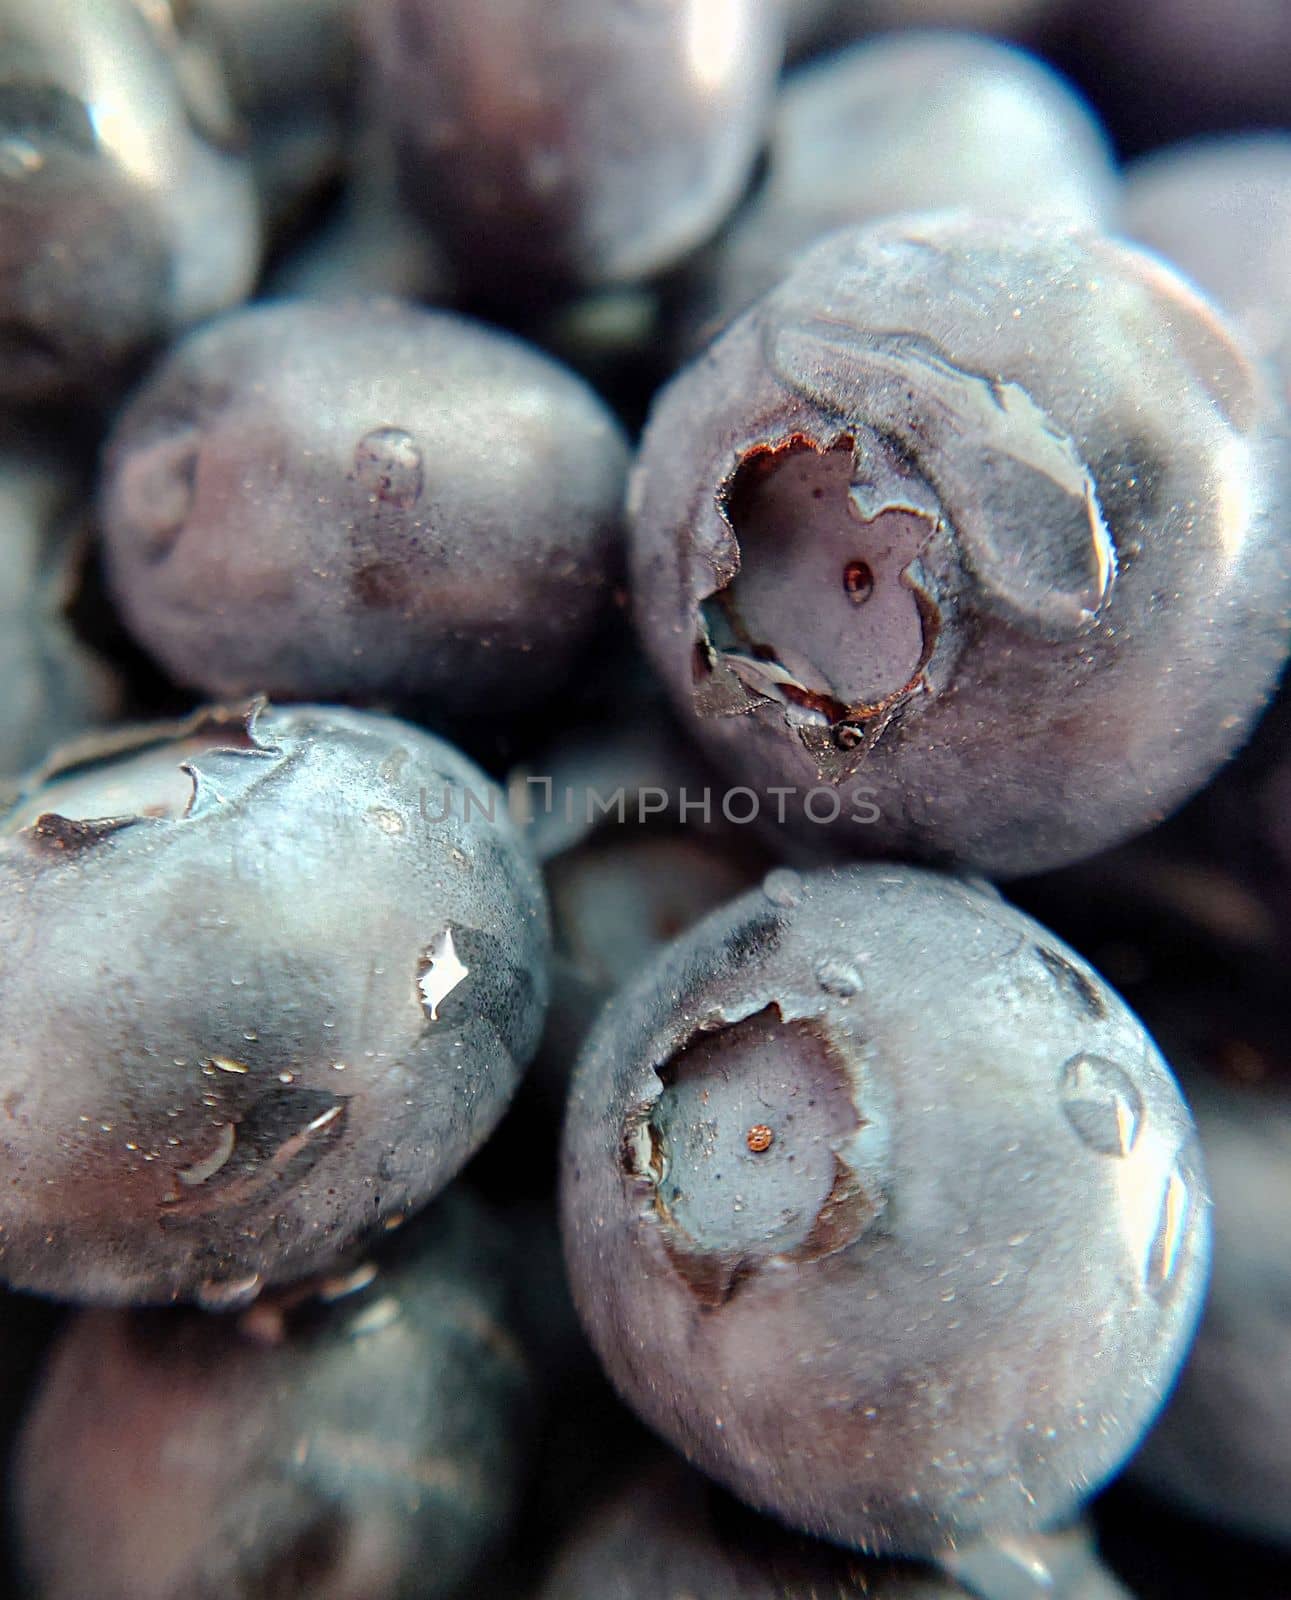 Garden ripe large blueberries with a drop of water close-up by Mastak80